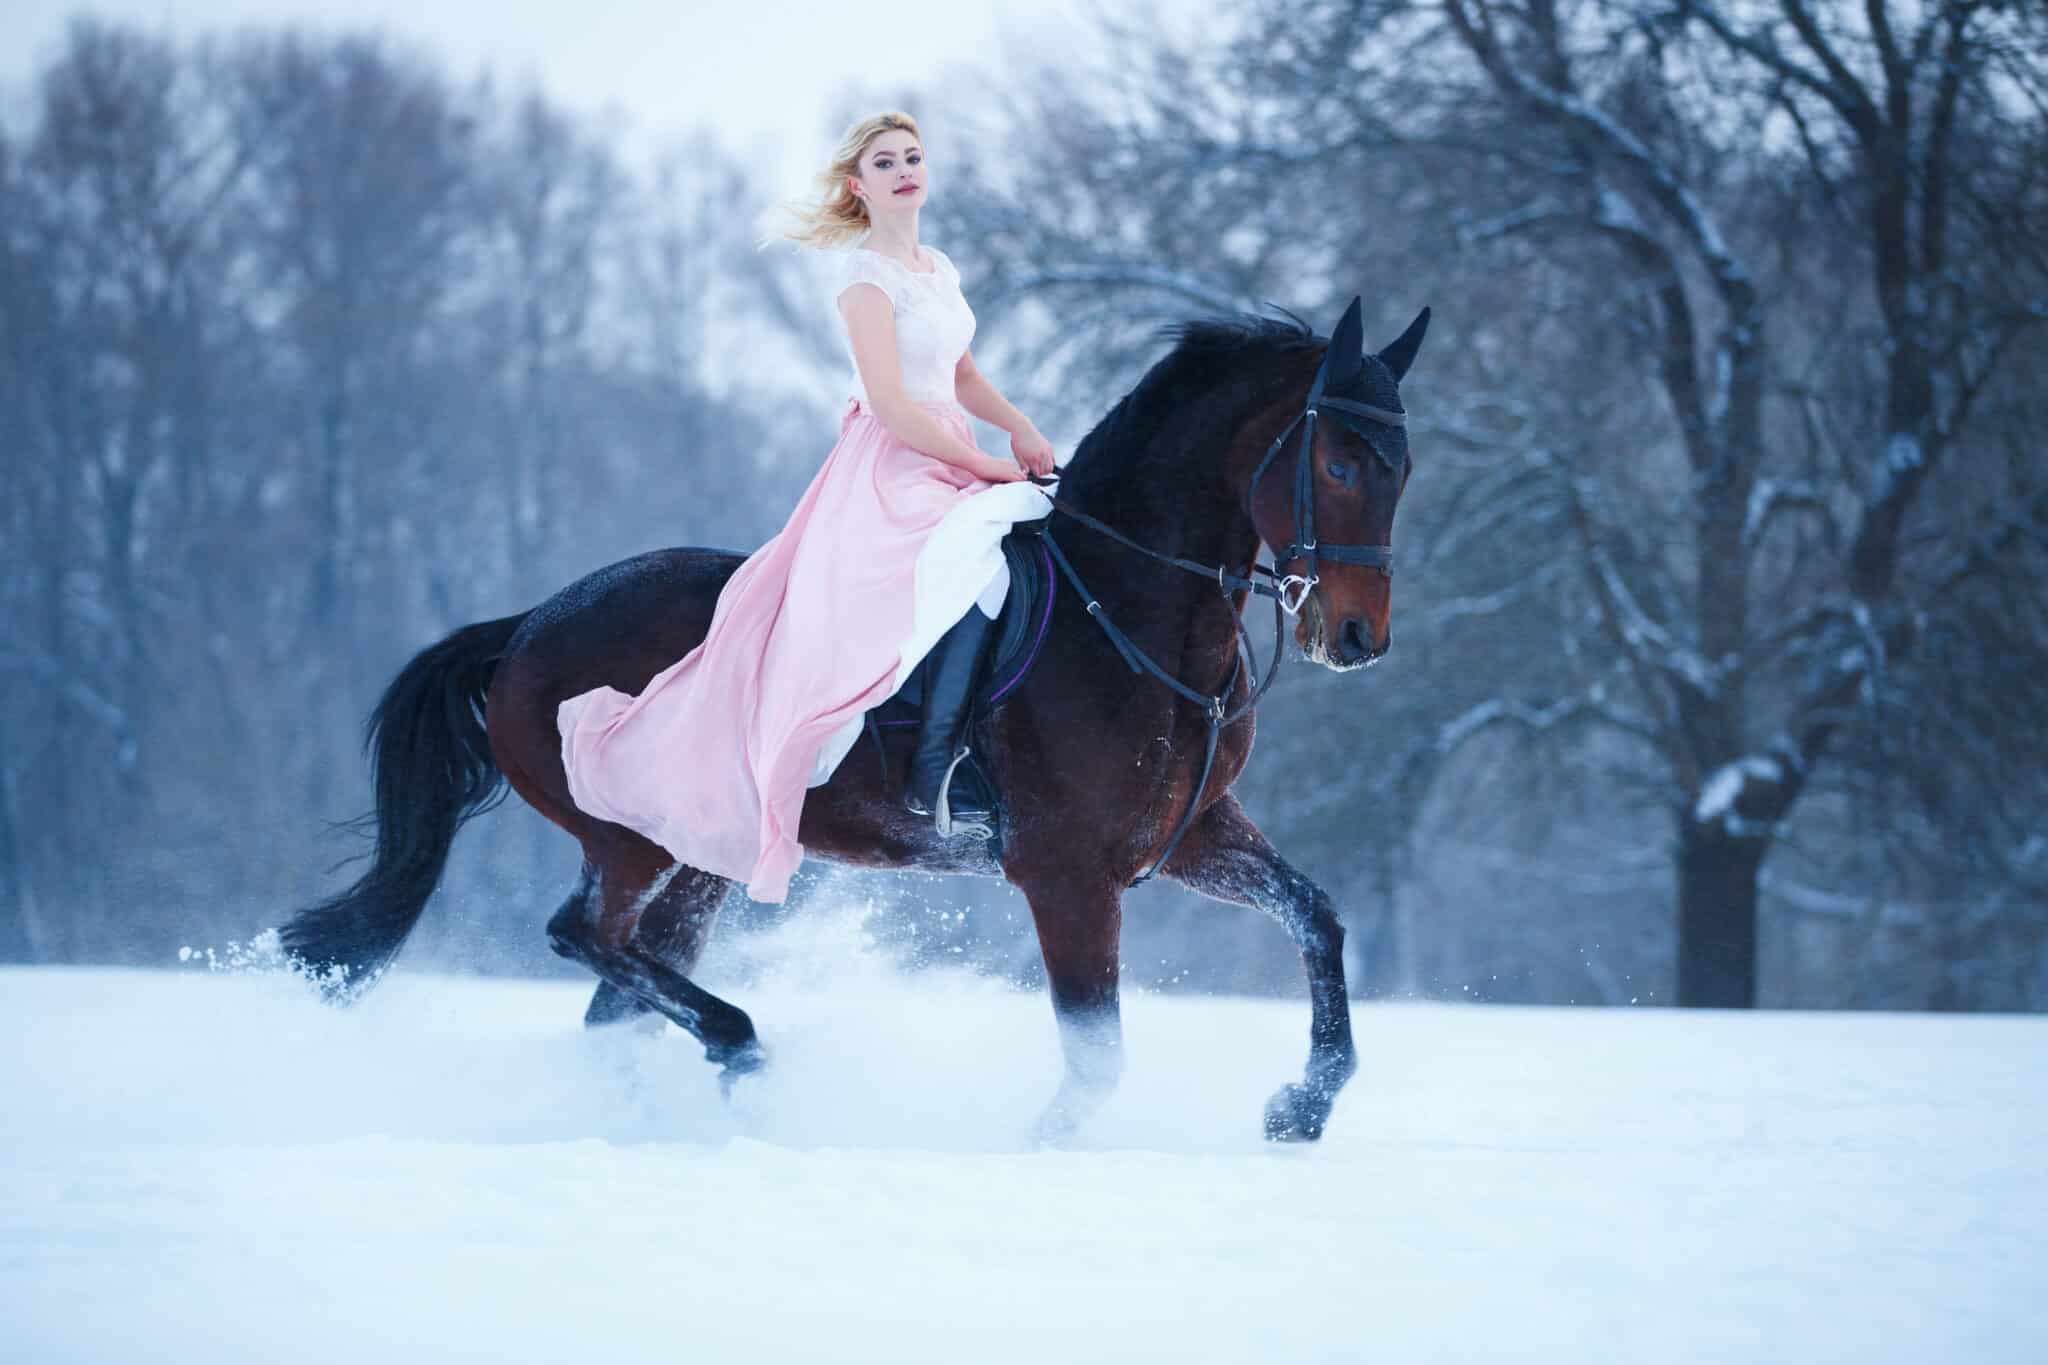 Young woman in dress riding a black horse on winter field